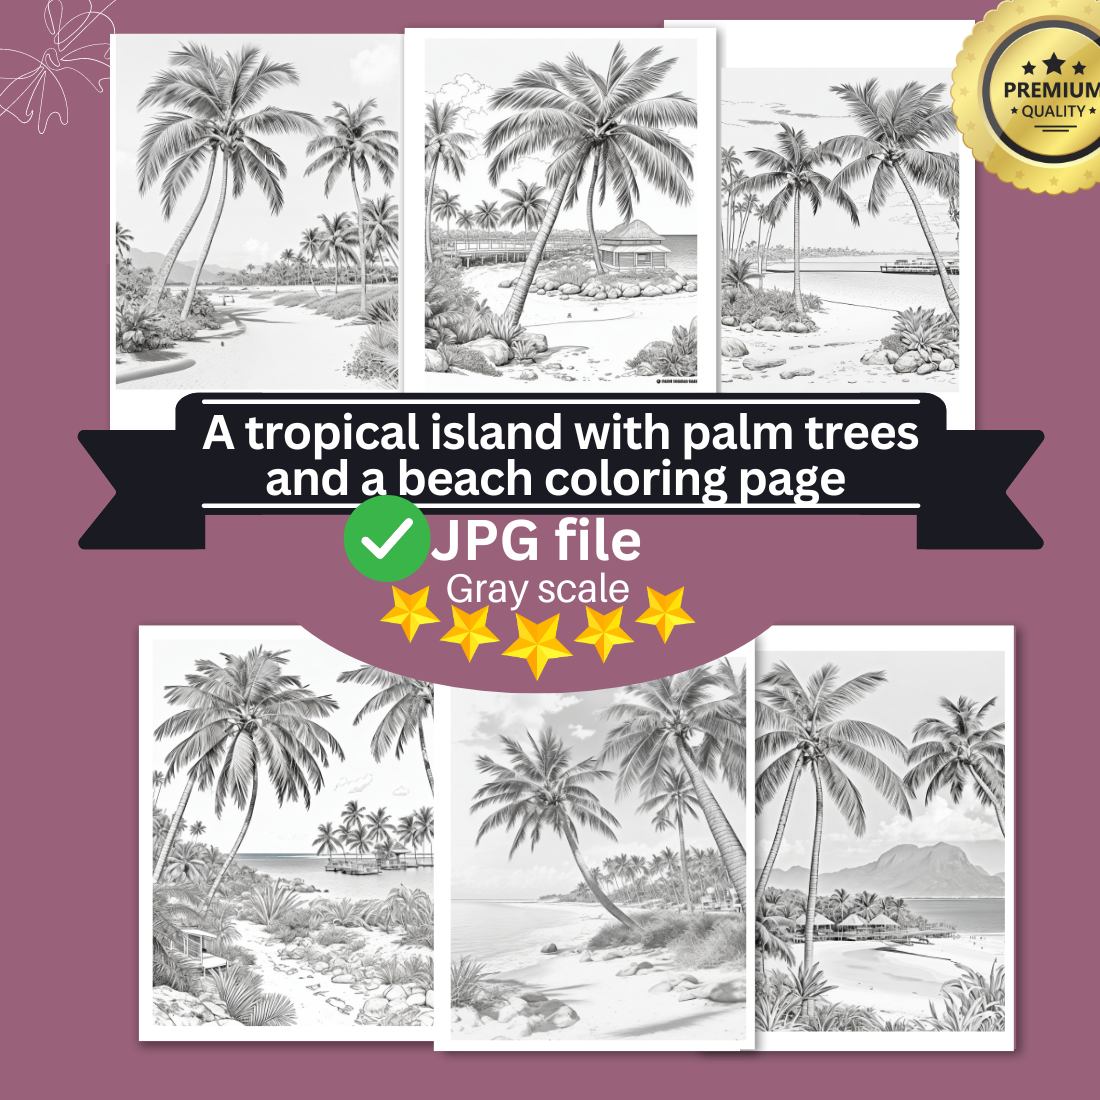 A tropical island with palm trees and a beach coloring page bundle cover image.